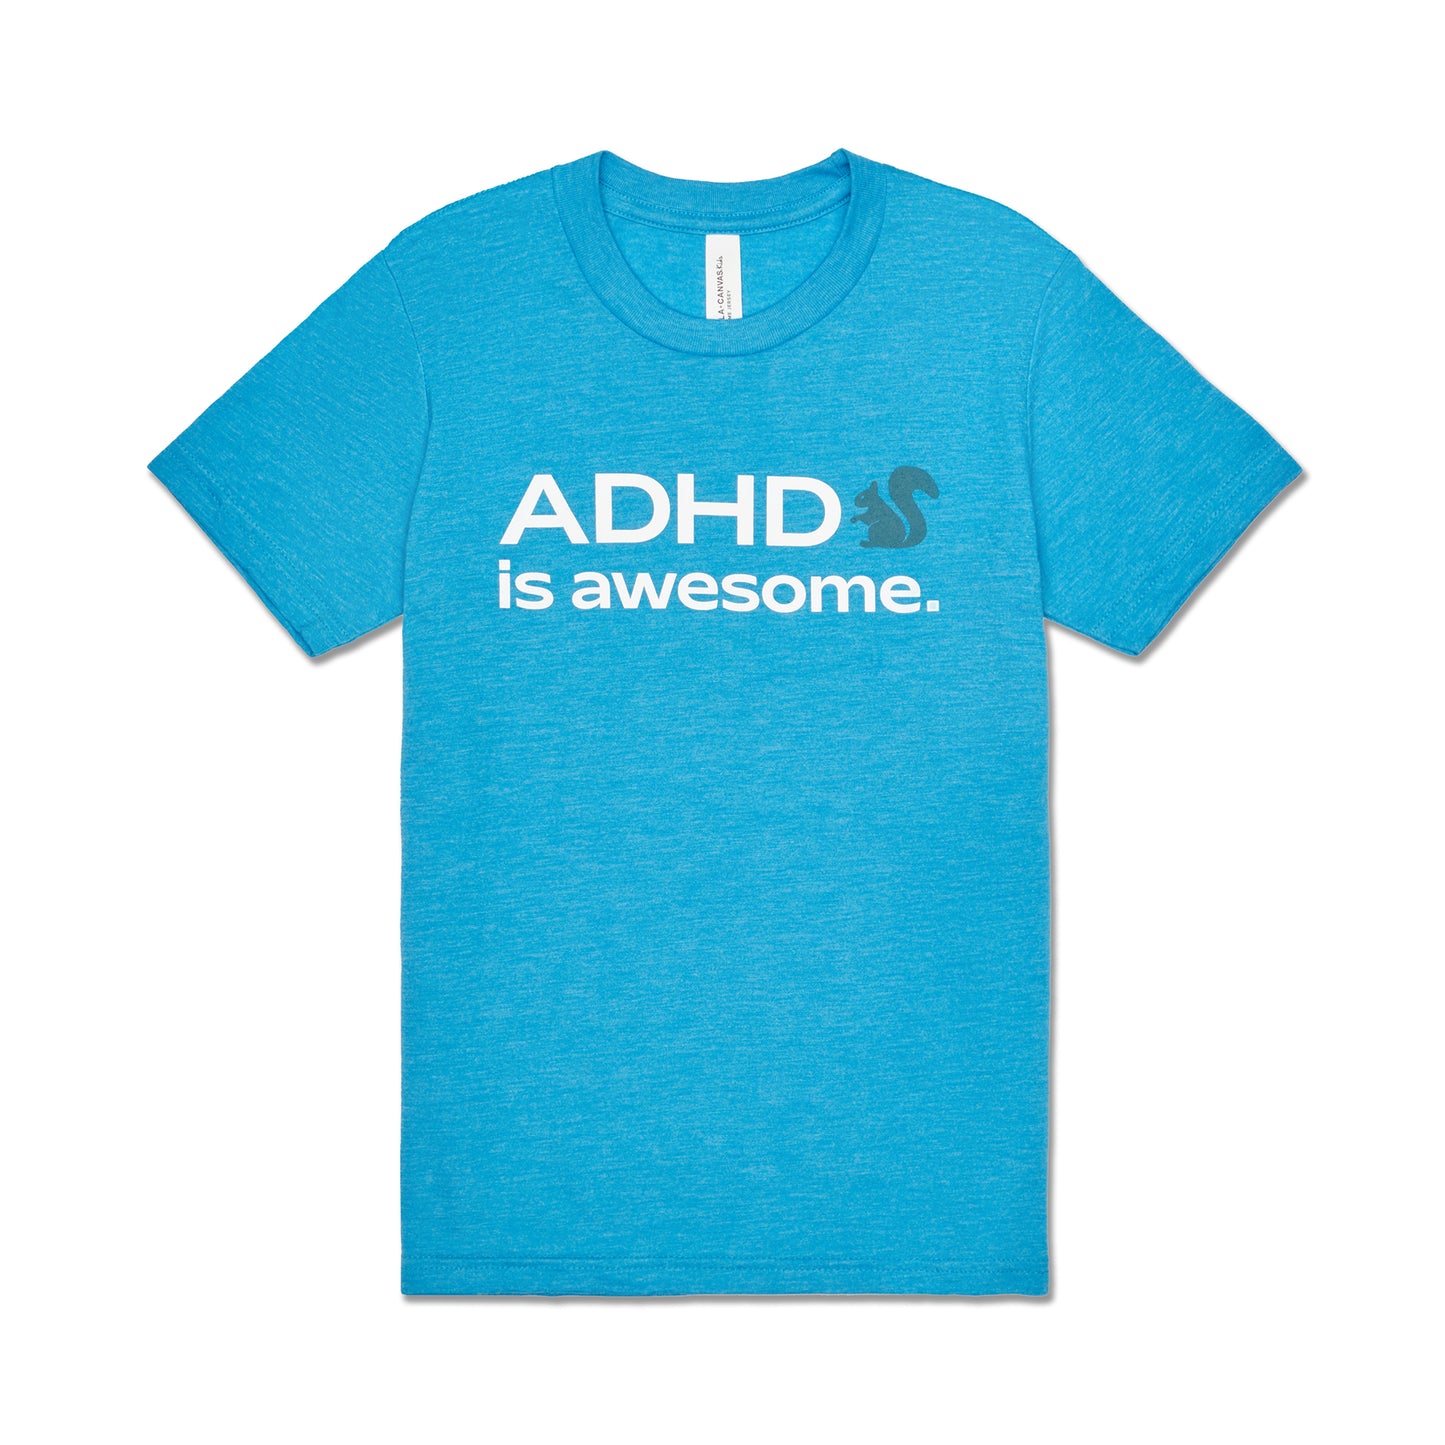 ADHD is Awesome Youth Tee